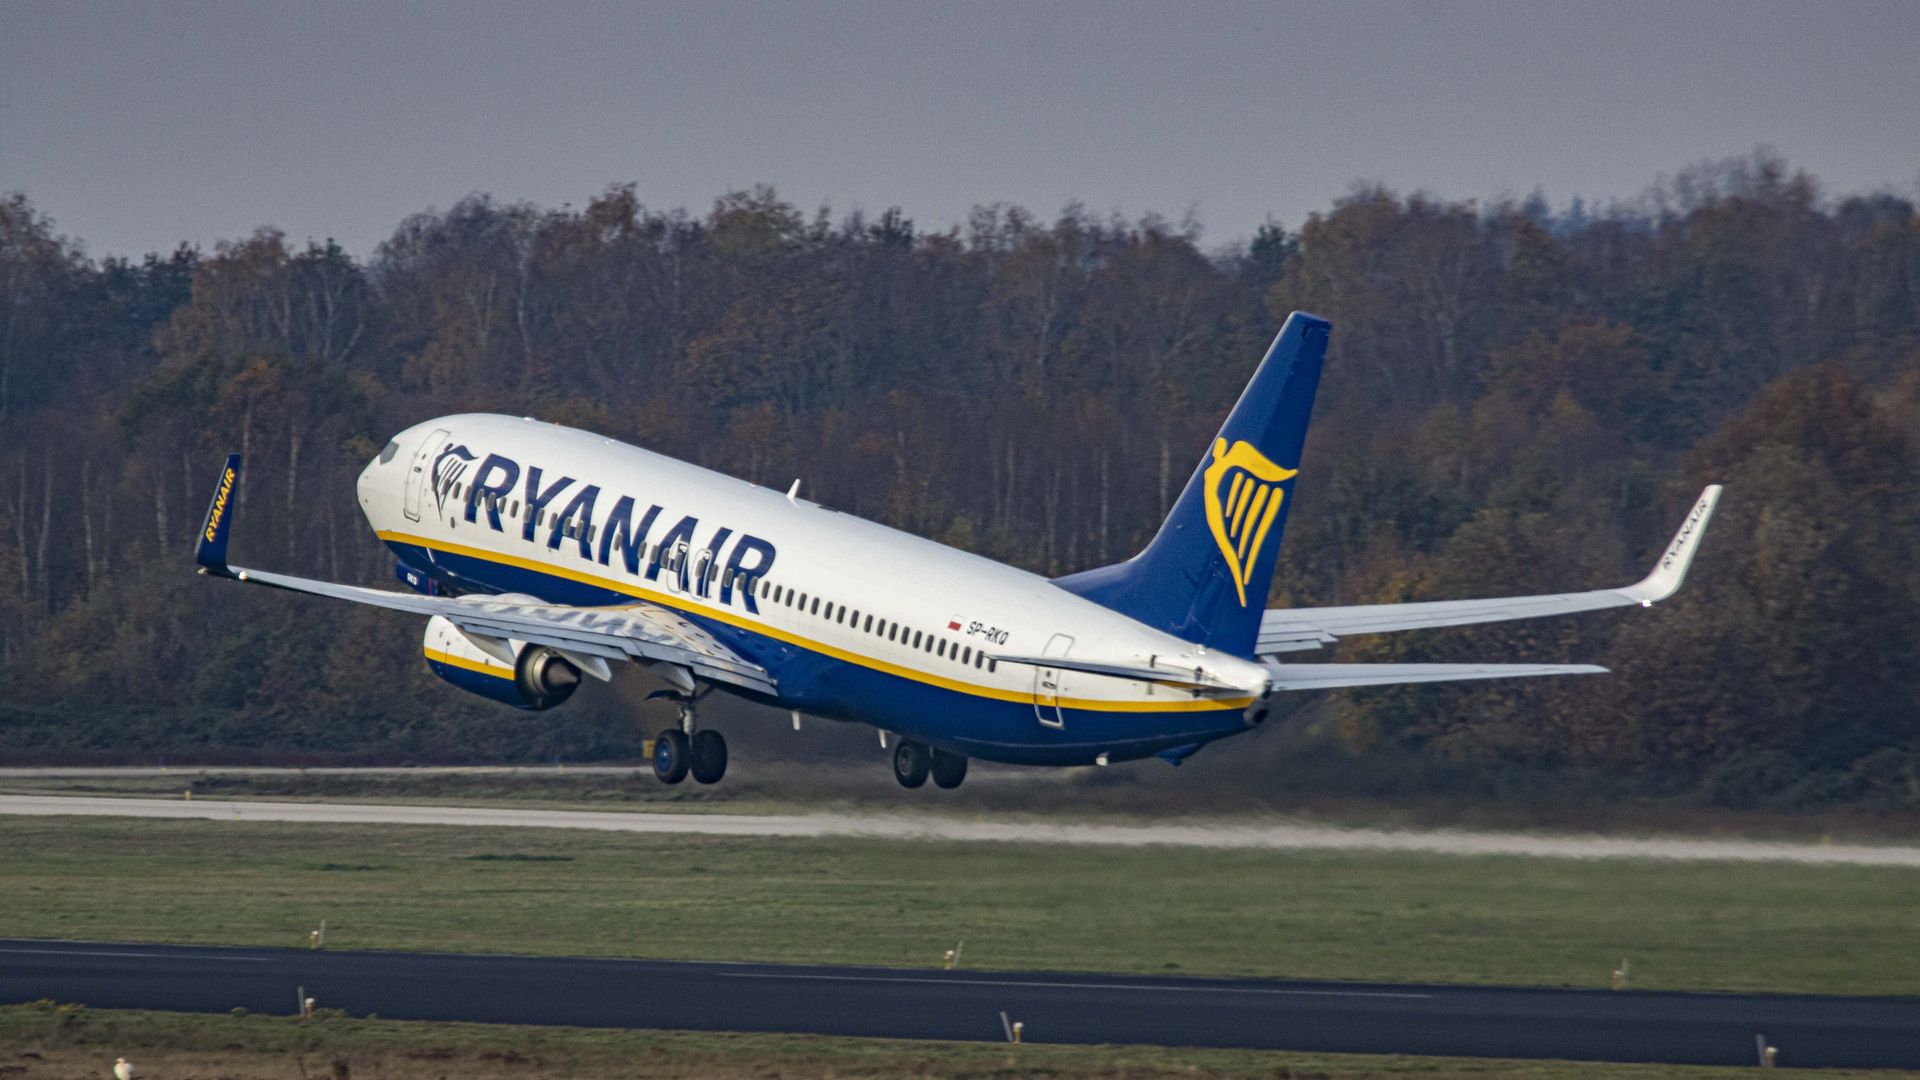 Ryanair low cost airline Boeing 737-800 aircraft as seen over the runway 